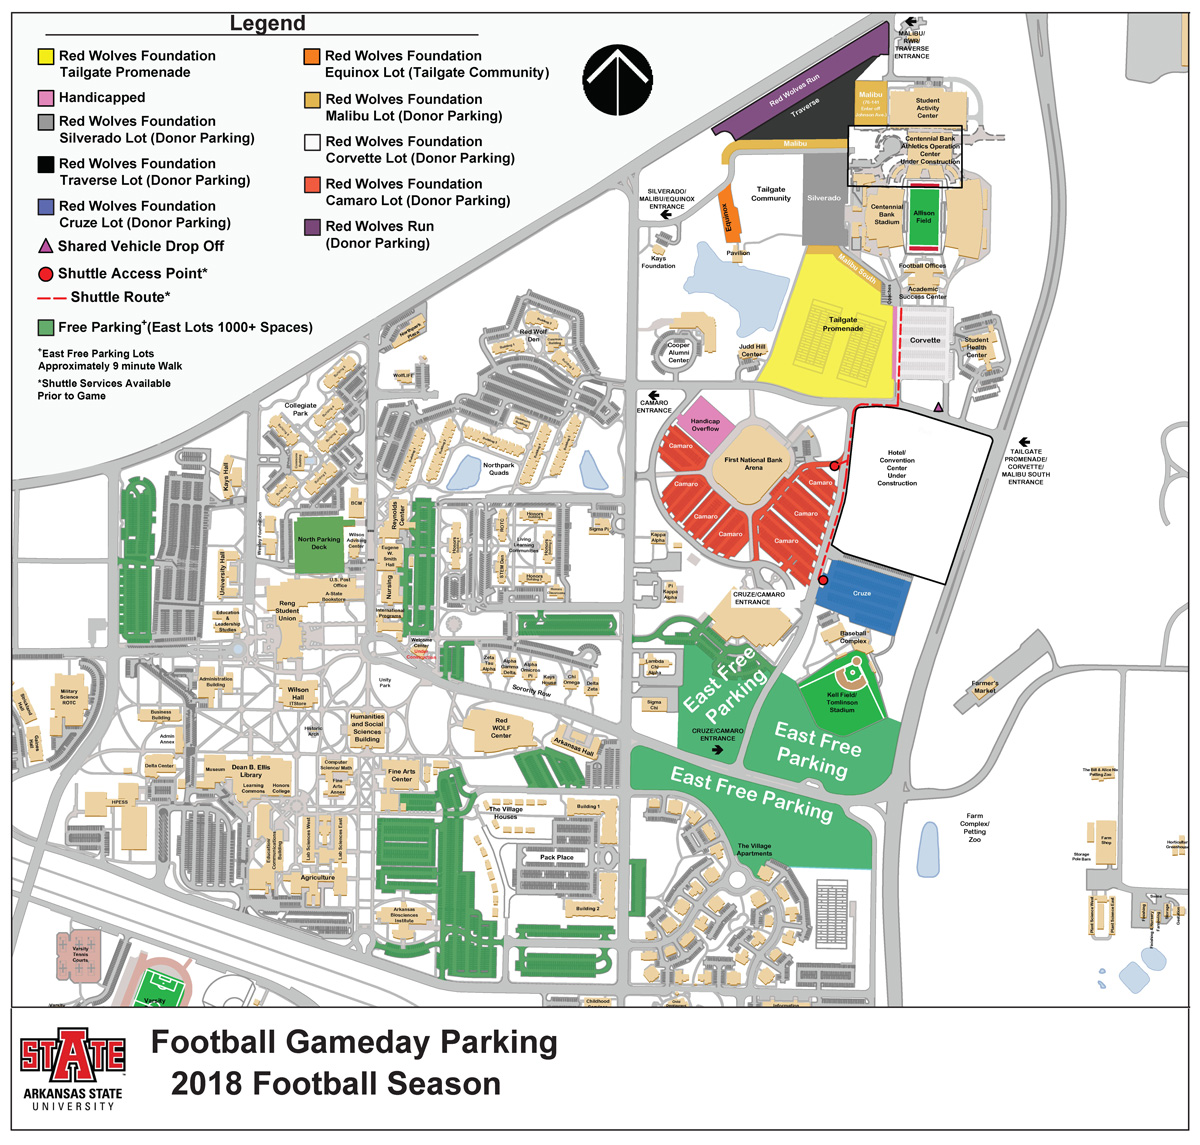 university of arkansas parking map A State Announces Changes To Gameday Parking university of arkansas parking map